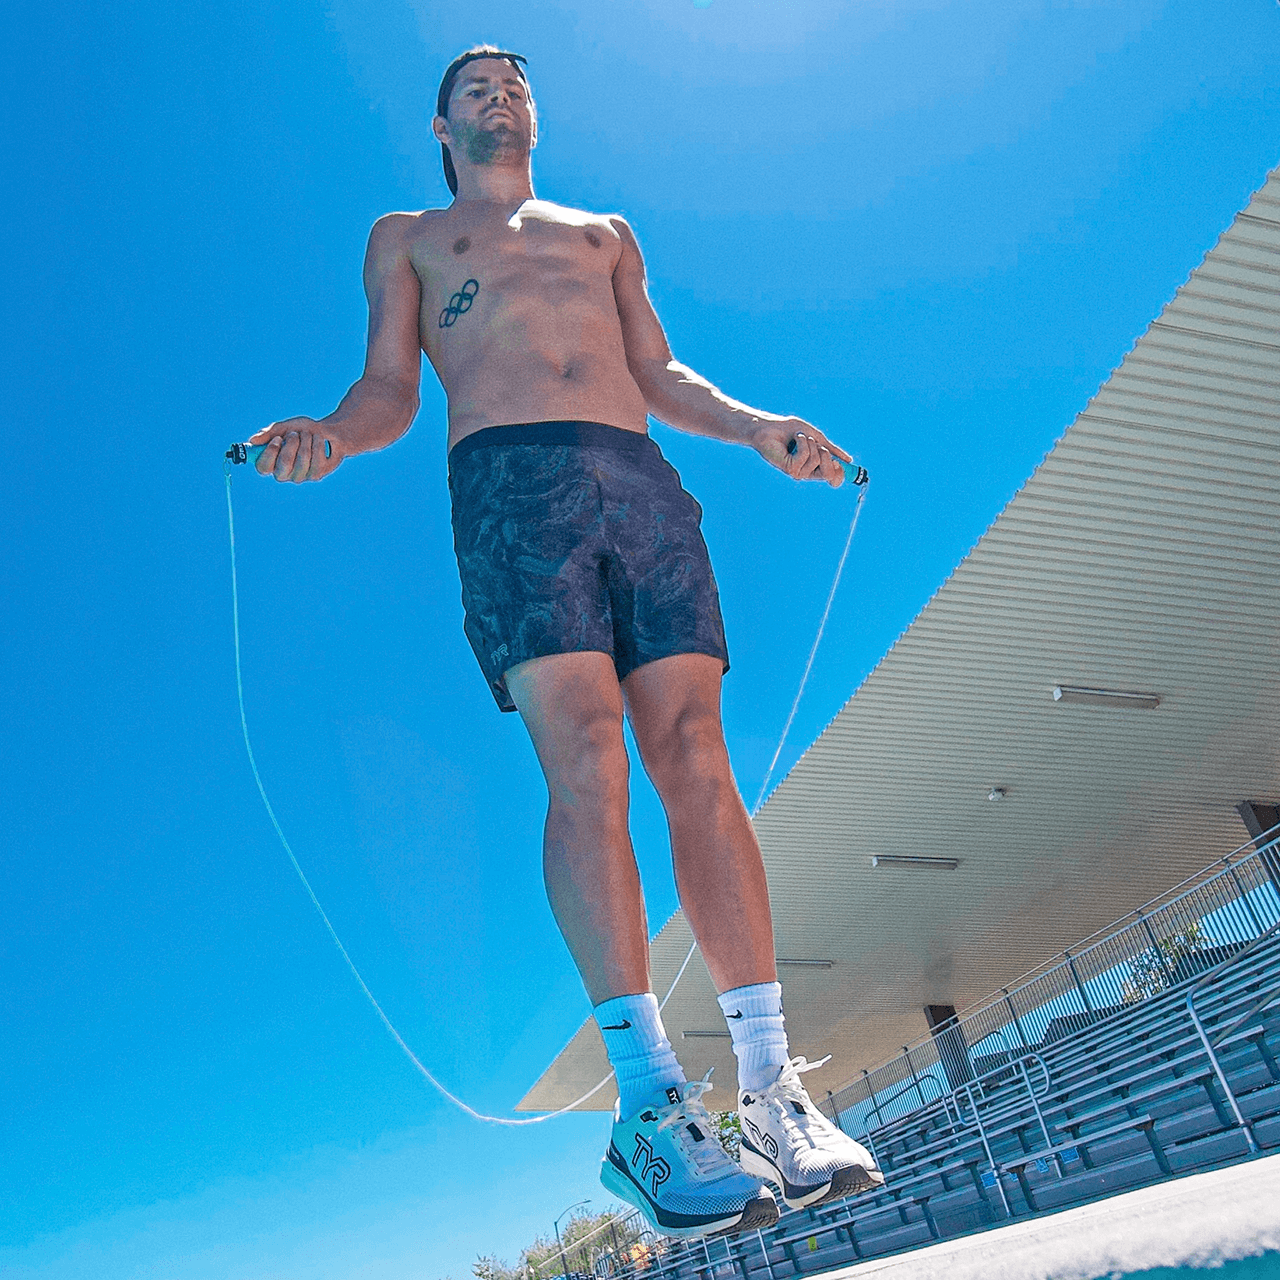 Skye CustomFit Jump Rope in use by olympic Swimmer Micheal Andrew